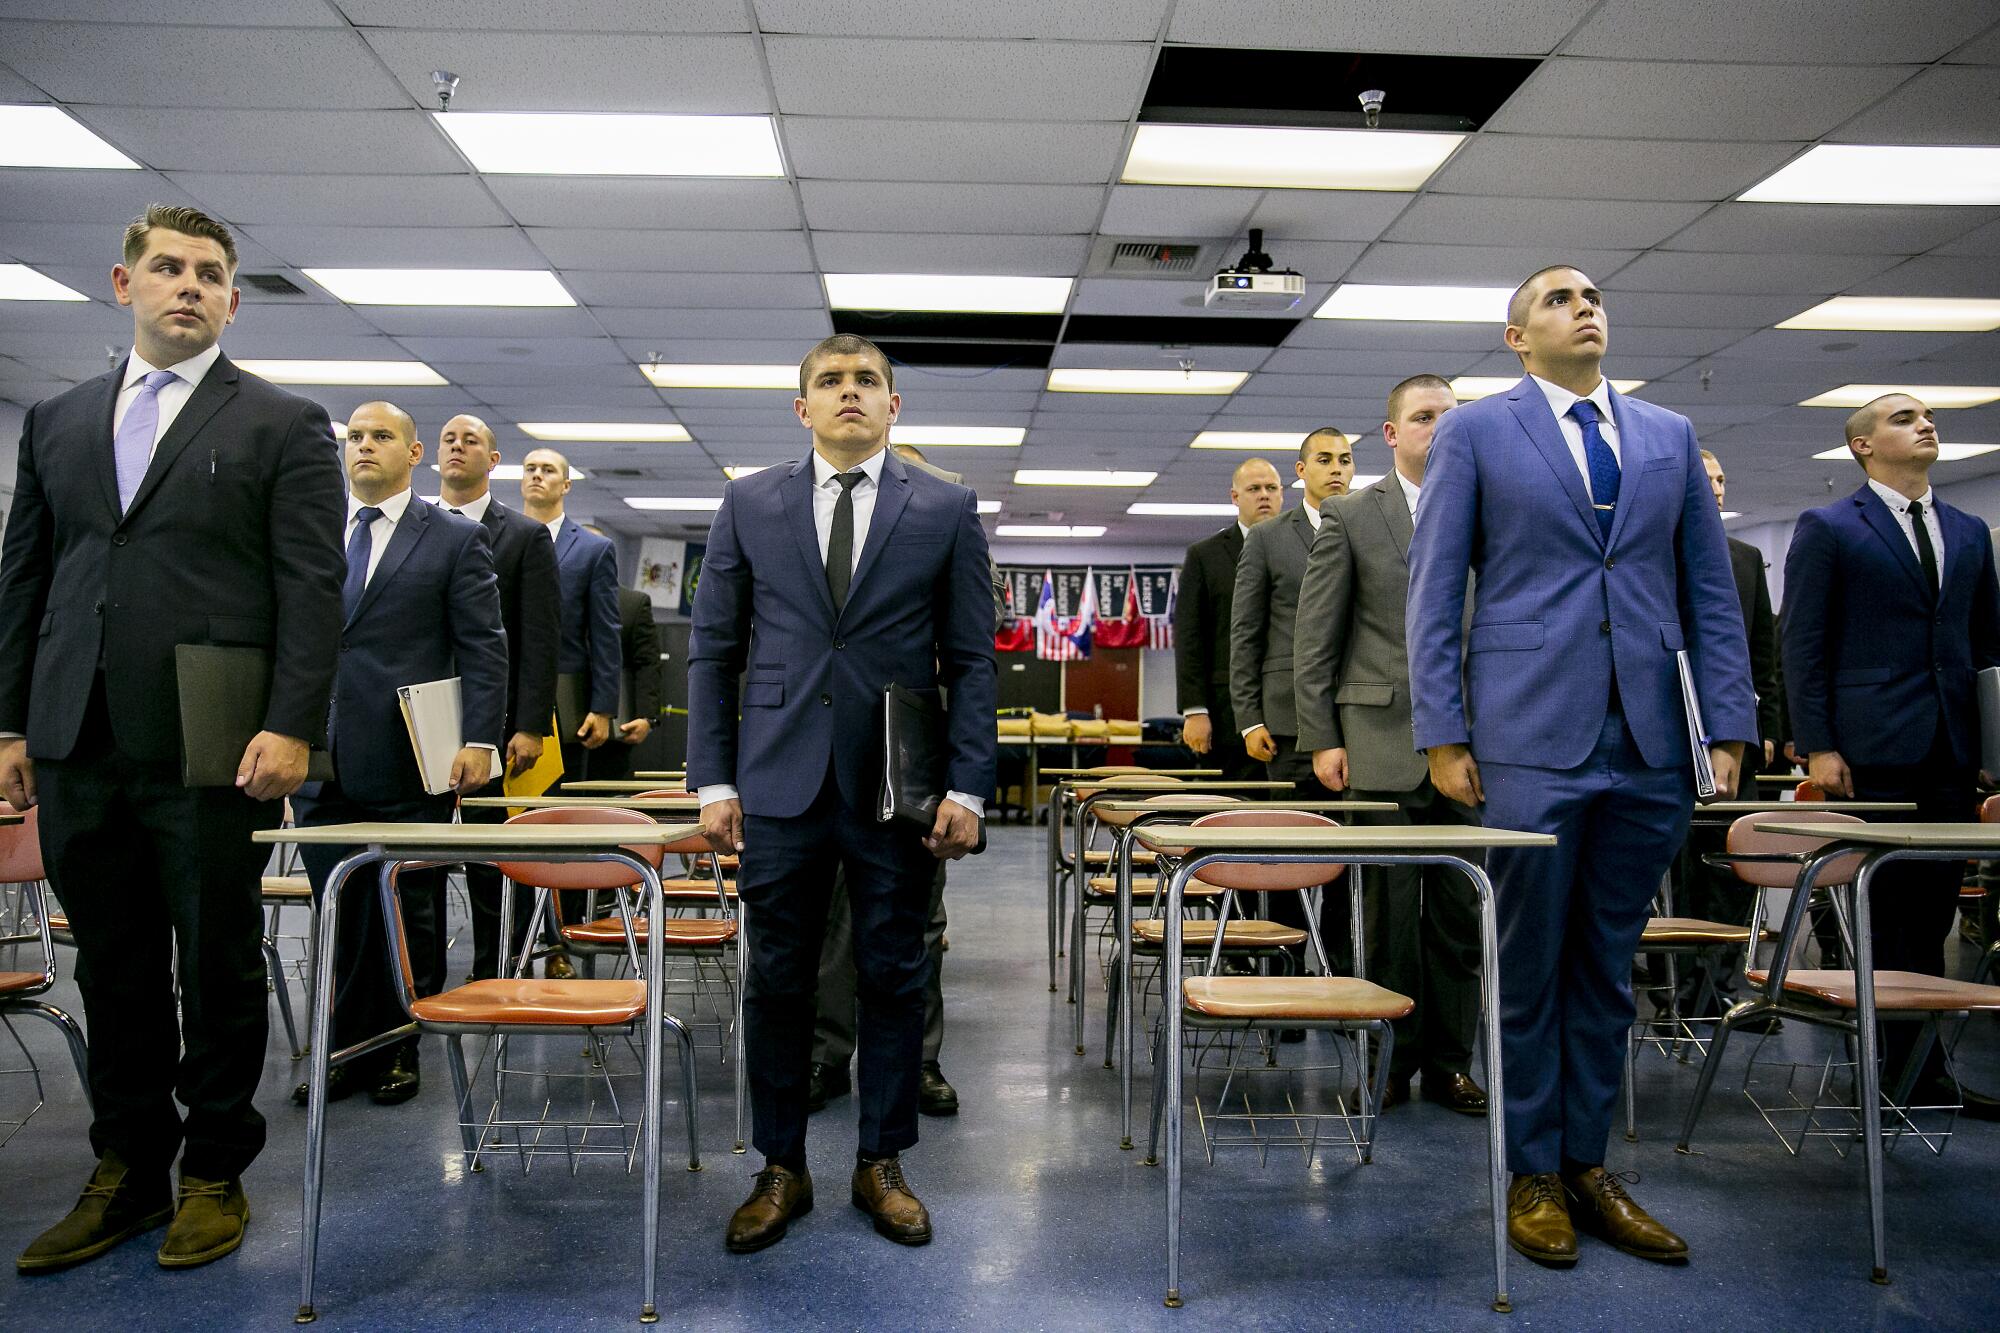 Costa Elizarraraz, center, stands at attention in the classroom alongside fellow recruits on orientation day for the 87th Academy.